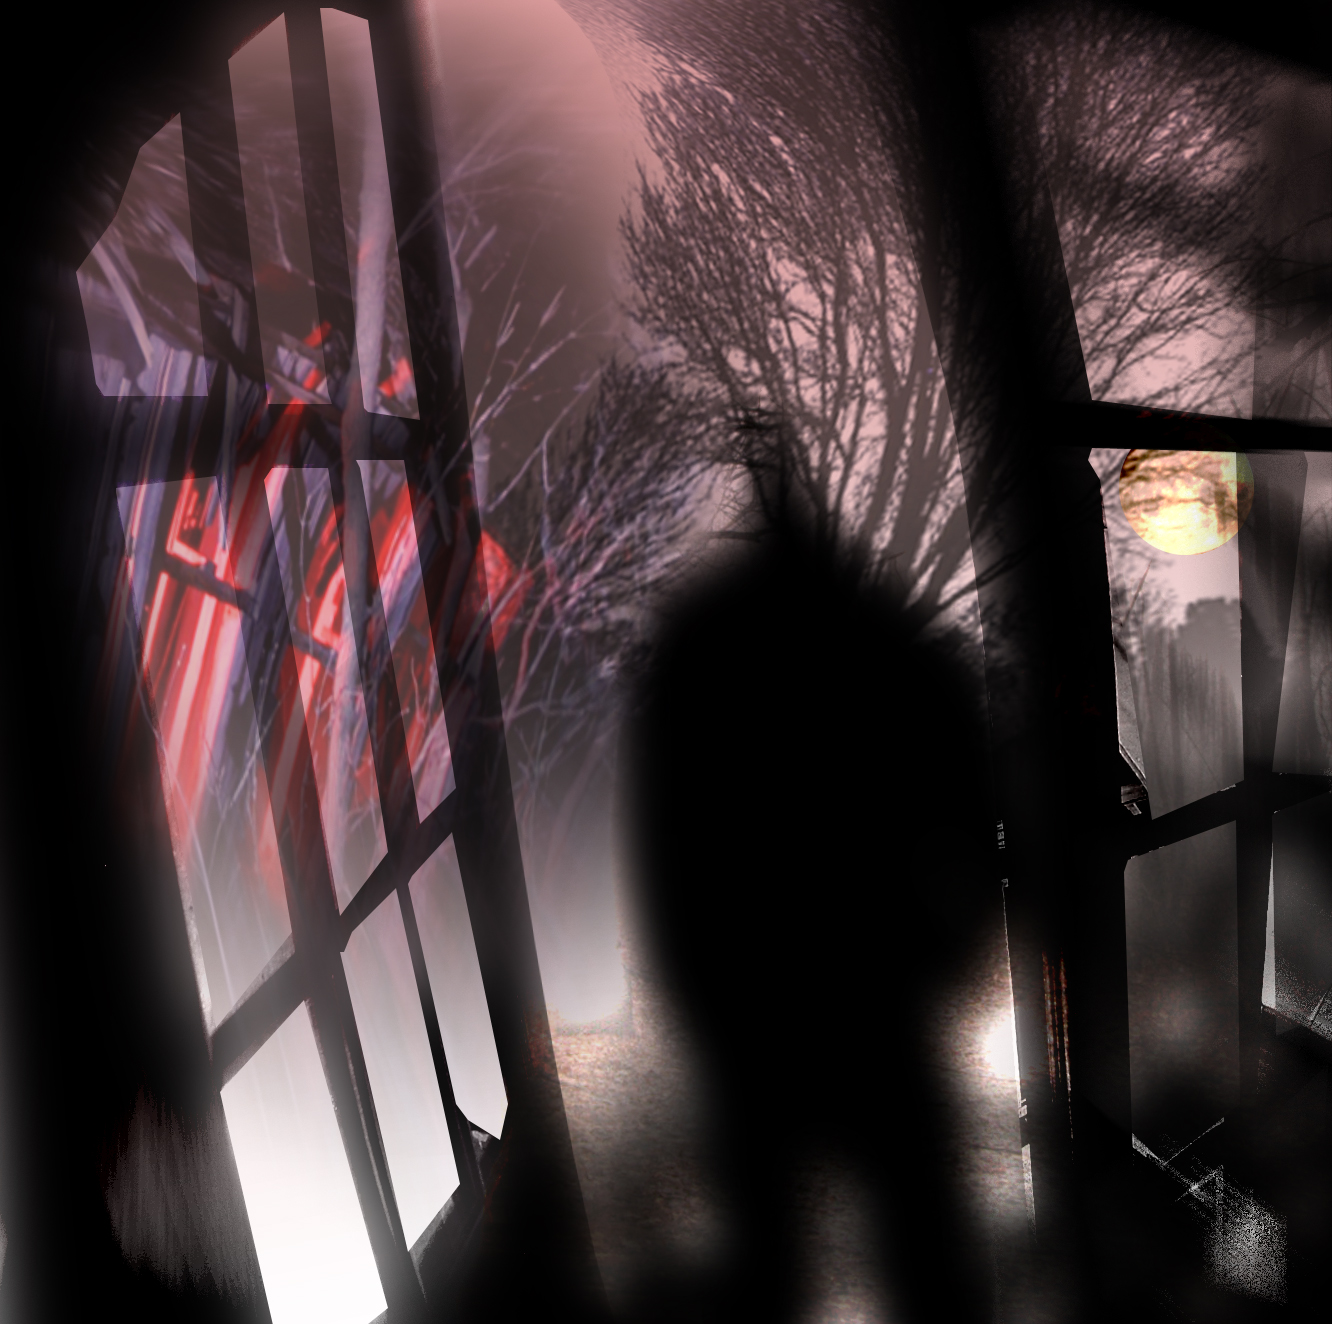 the night scene shows a dark city with buildings and fog